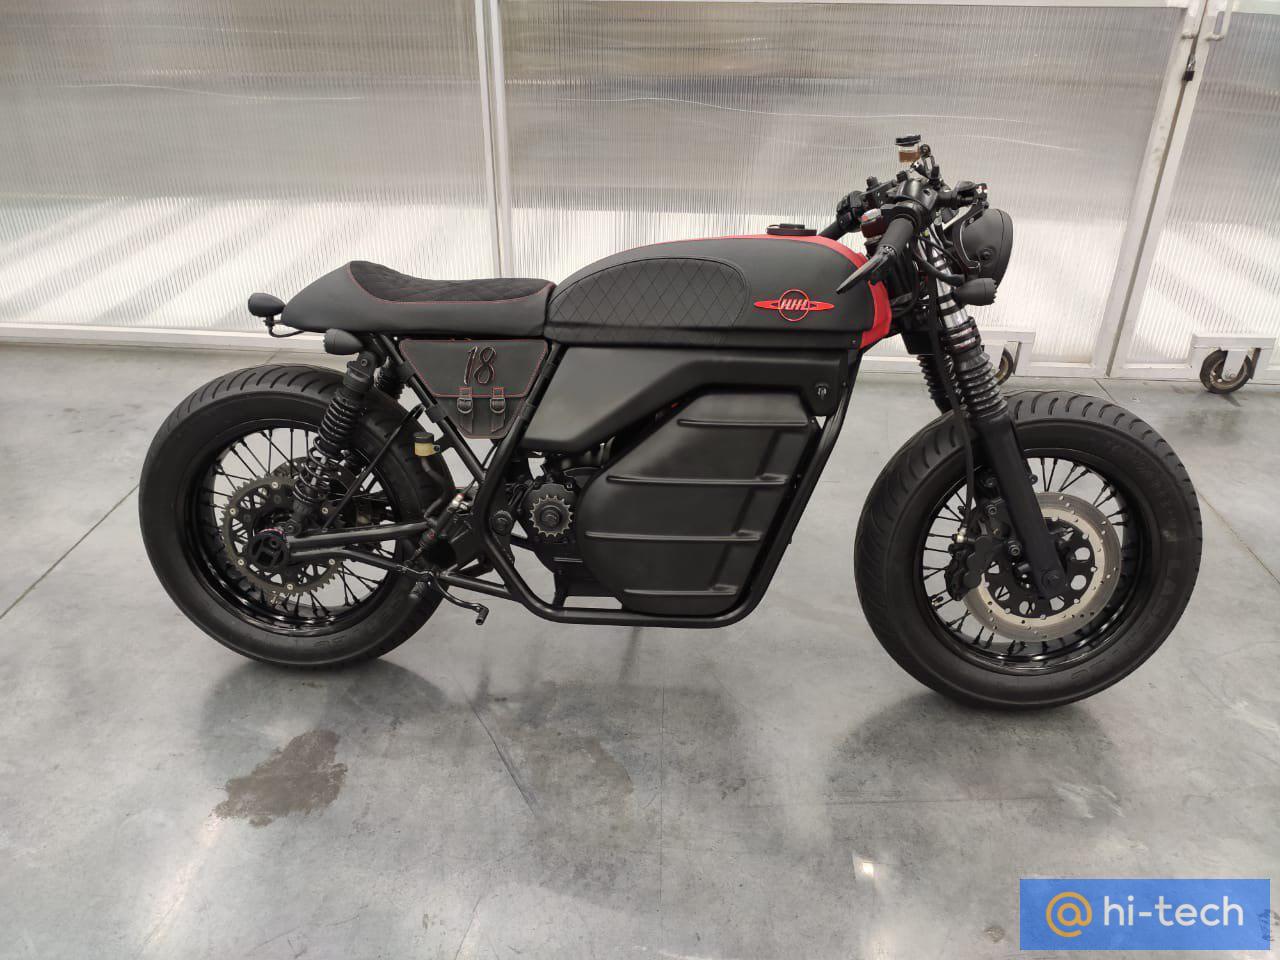 ИЖ Cafe Racer 2019